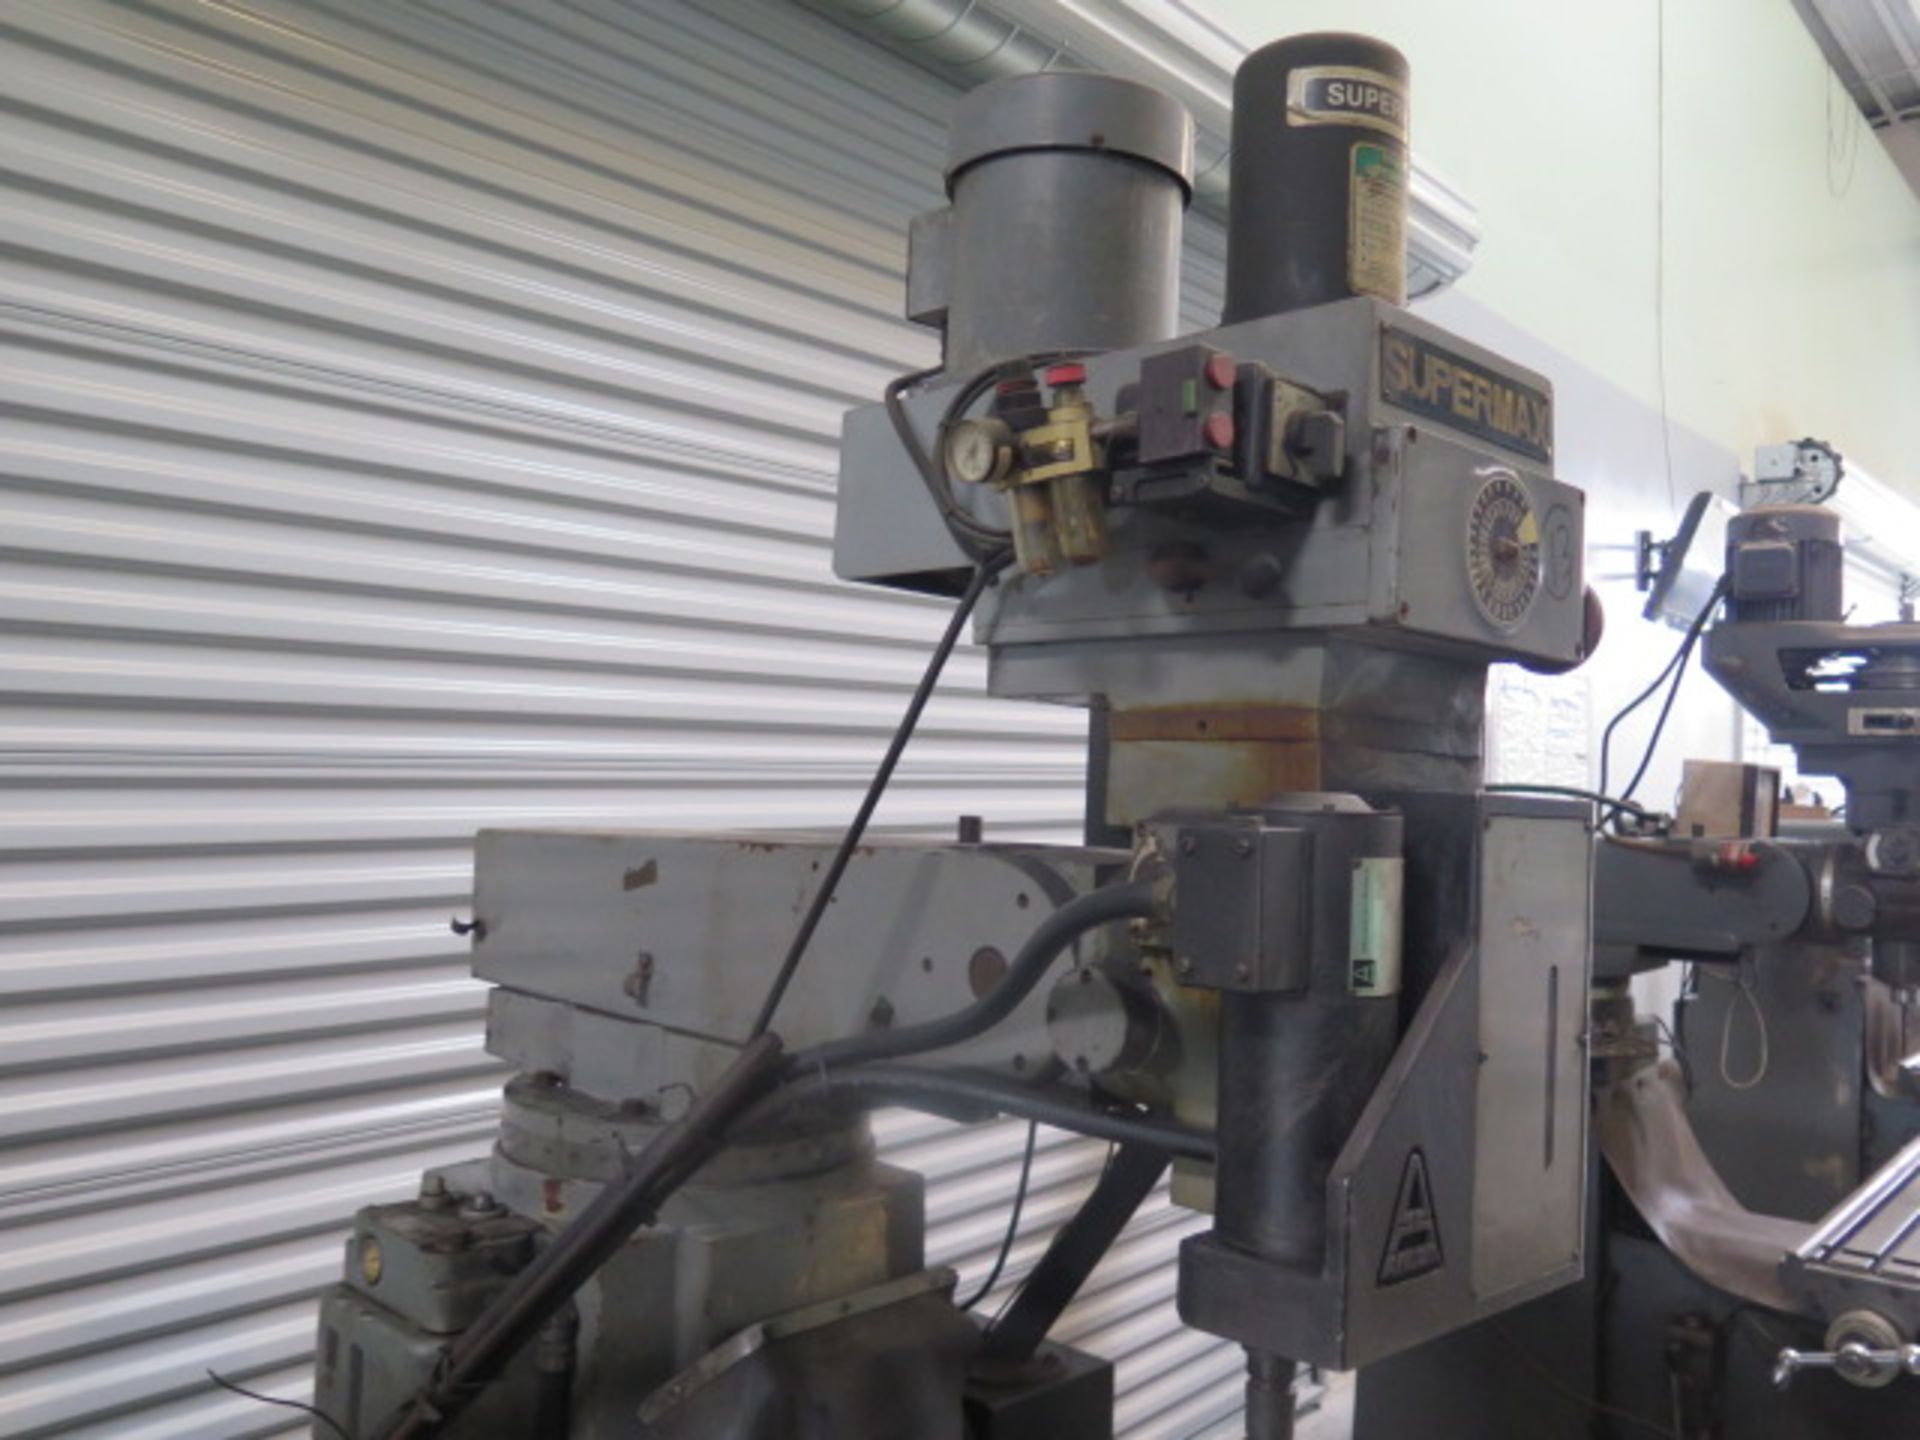 Supermax 3-Axis CNC Vertical Mill w/ Anilam Crusader II Controls, 60-4200 Dial Change RPM, Power - Image 9 of 10